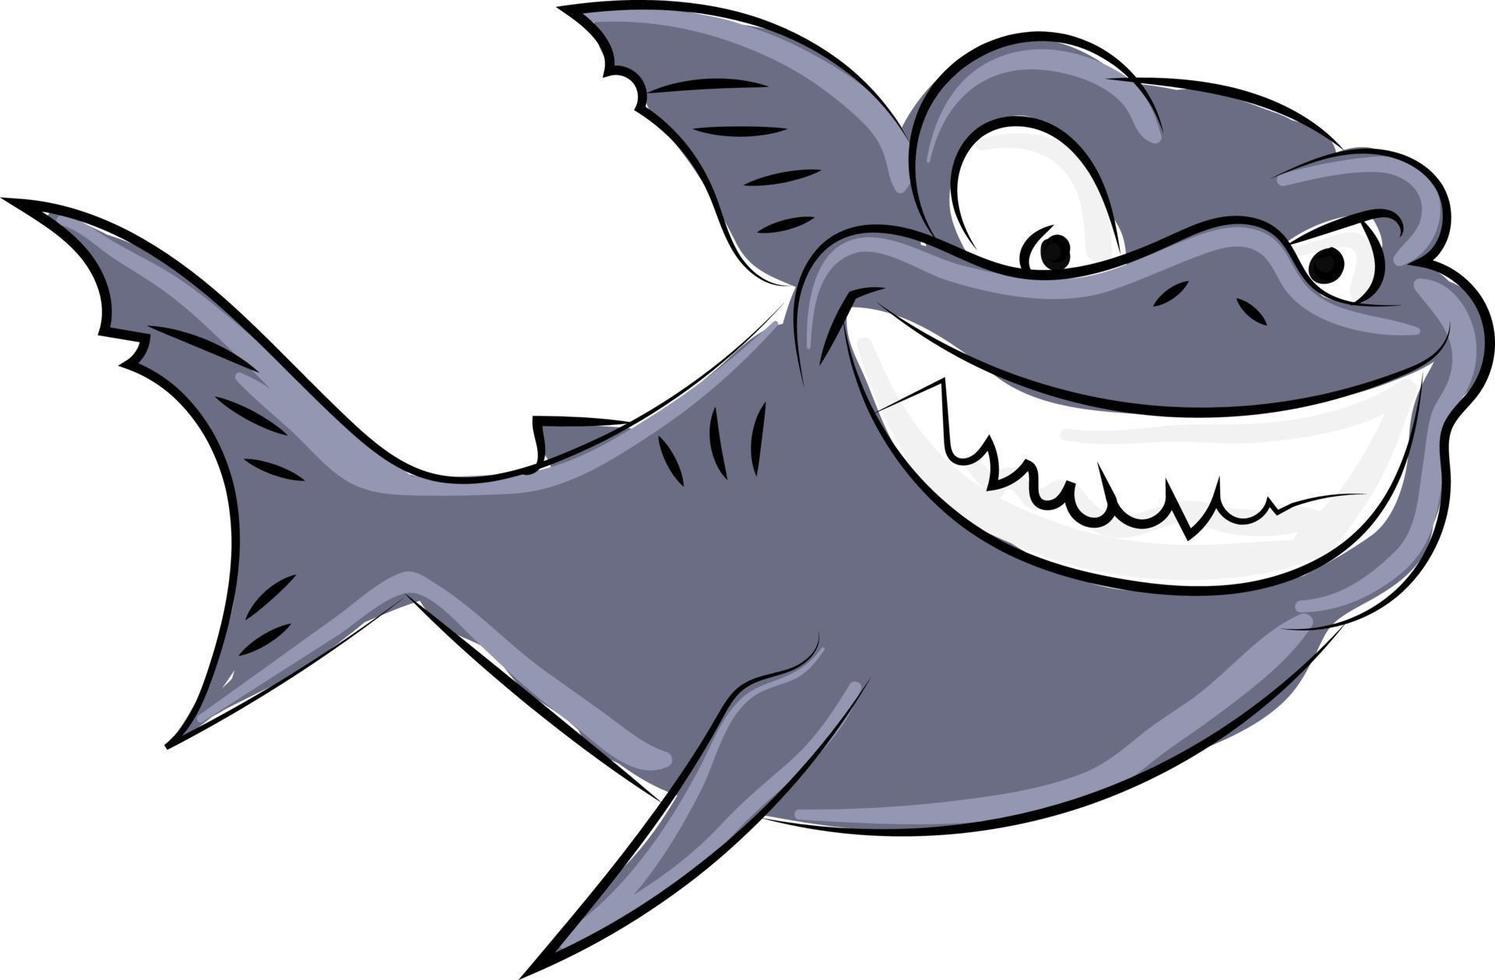 Angry shark, illustration, vector on white background.